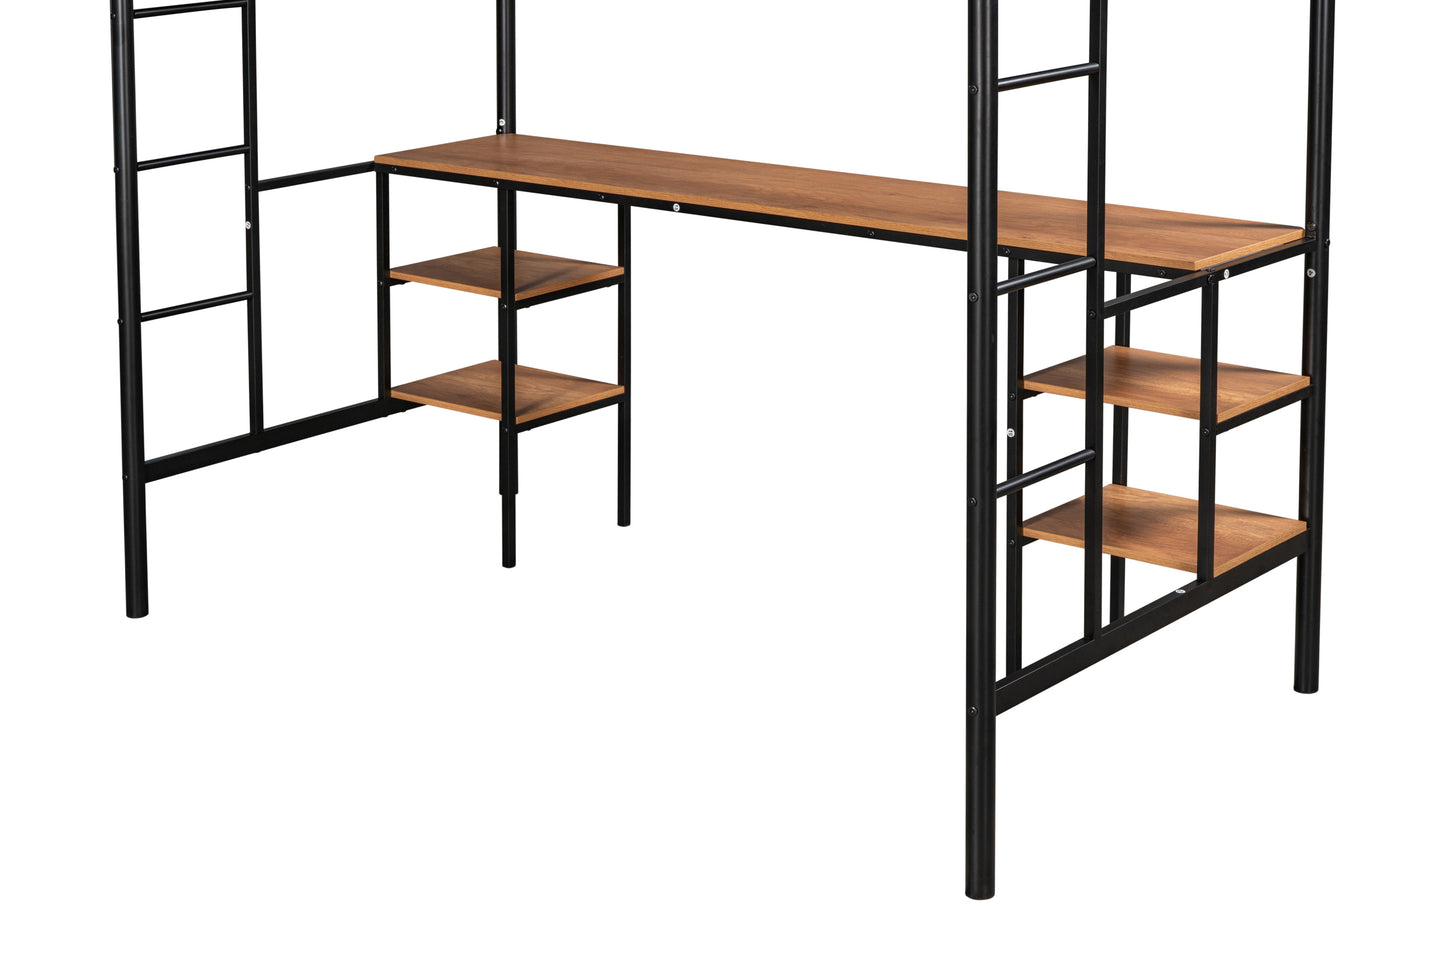 Twin-size Loft Bed with Table & Shelves/ Heavy-duty Sturdy Metal/ Built-in Table & Shelves/ Noise Reduced/ Safety Guardrail/ 2 Side Ladders/ CPC Certified/ No Box Spring Needed